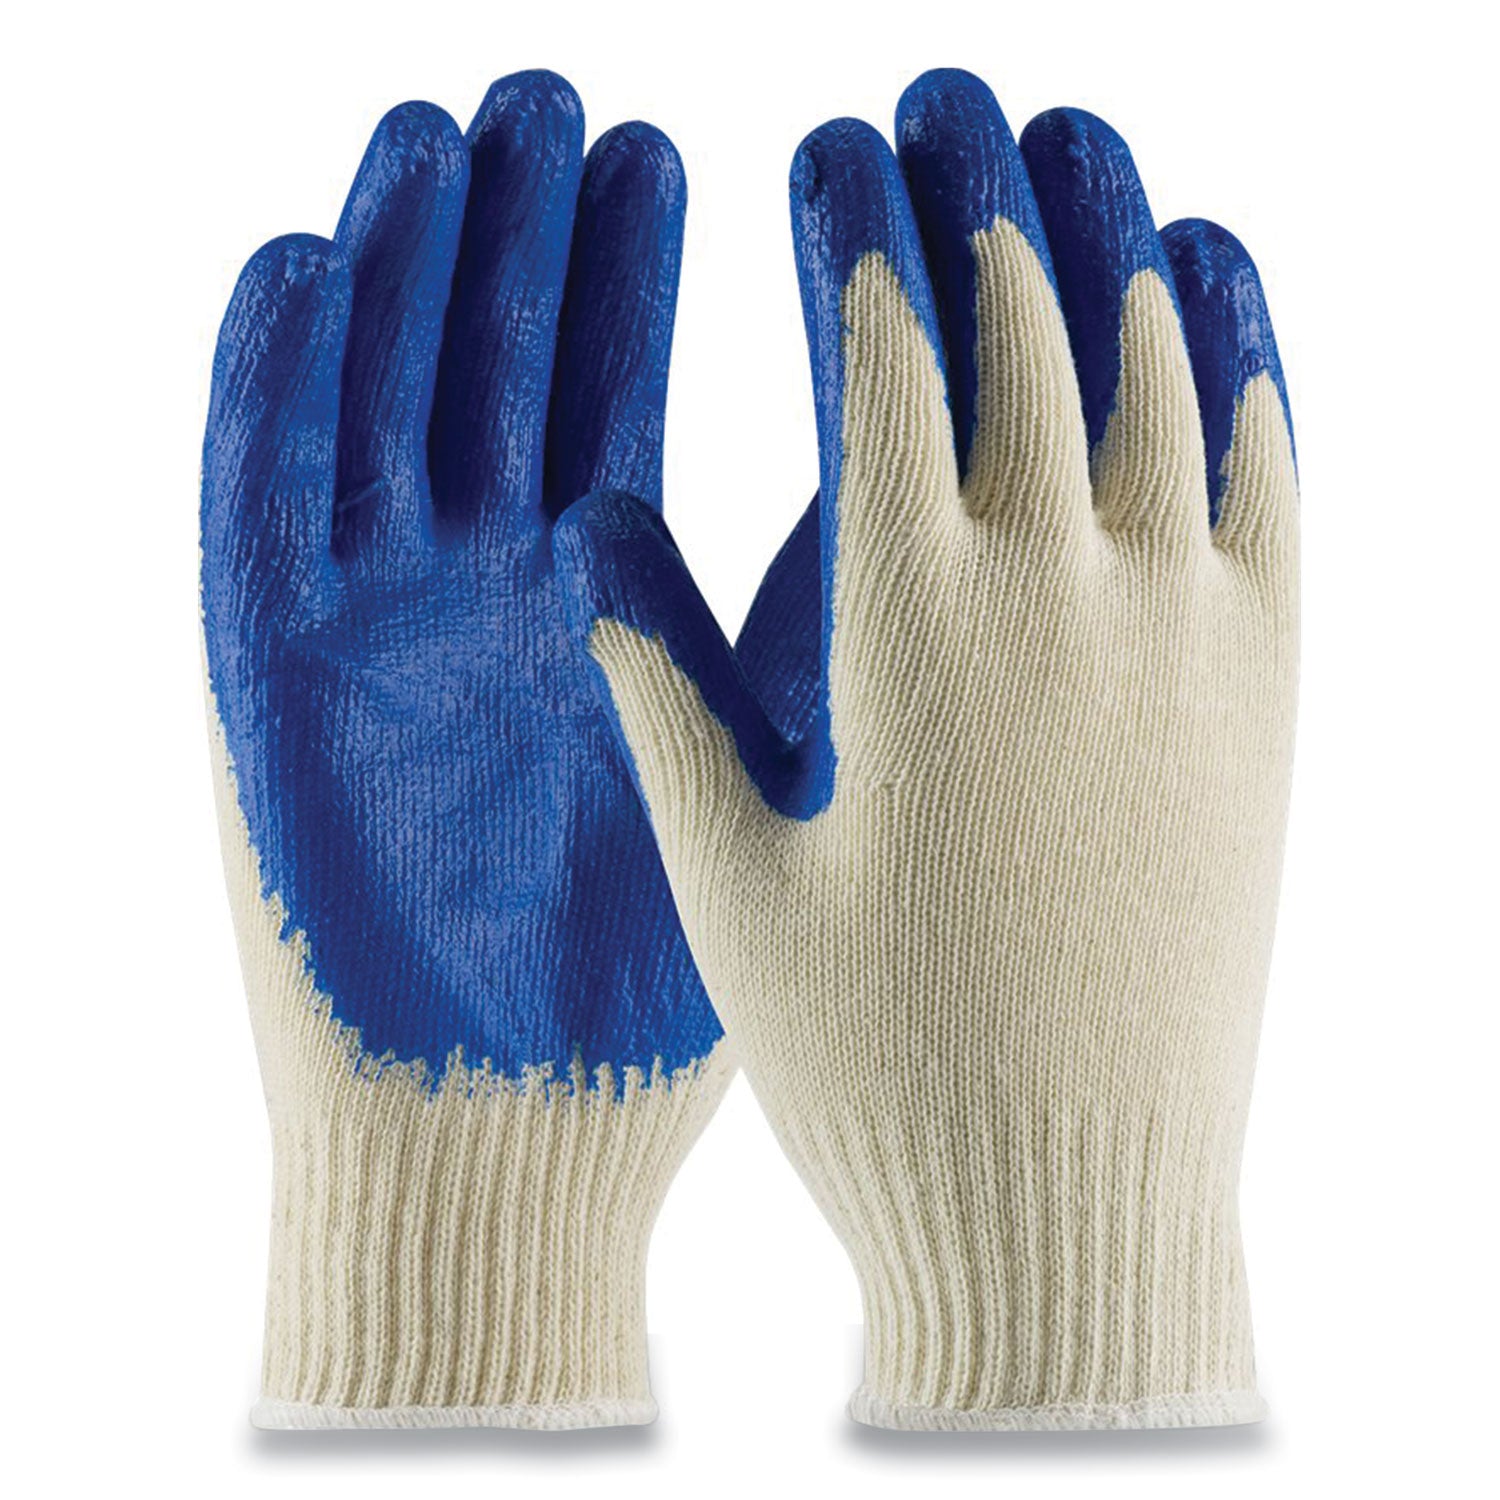 seamless-knit-cotton-polyester-gloves-regular-grade-small-natural-blue-12-pairs_pid39c122s - 1